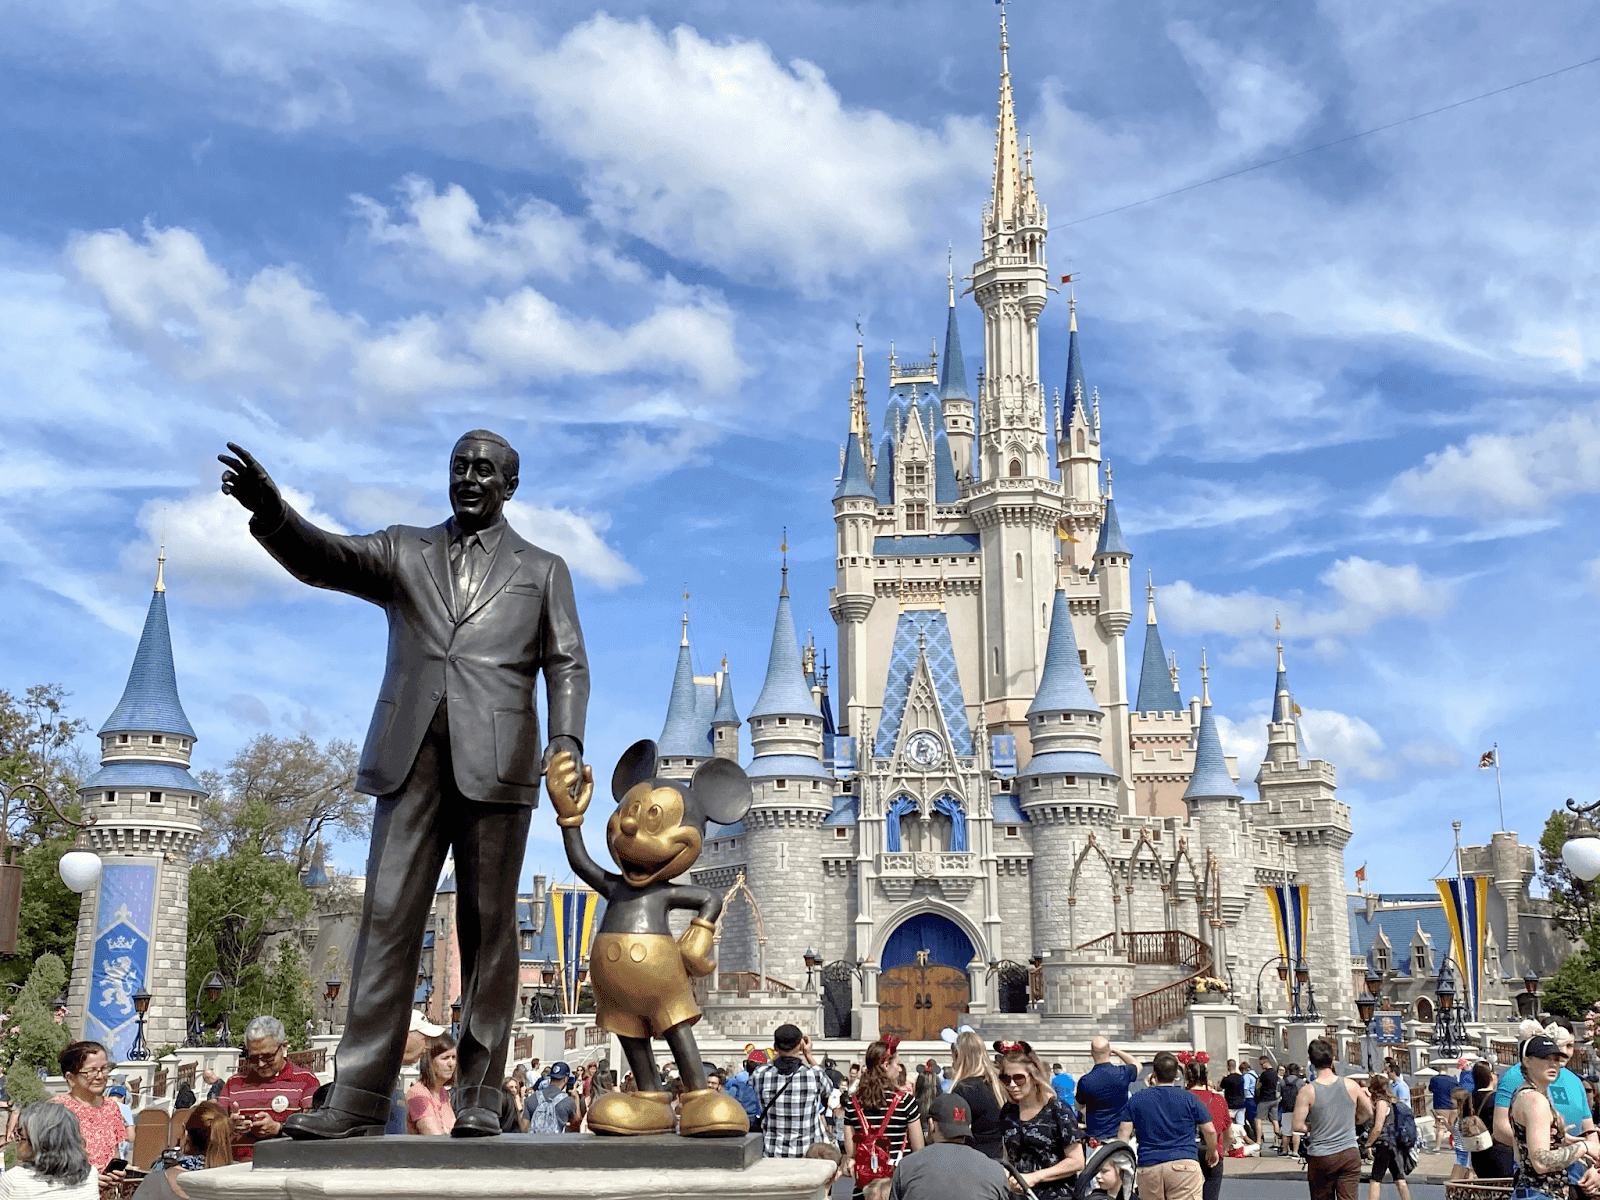 Walt disney & Mickey Mouse statue in front of the Disney castle